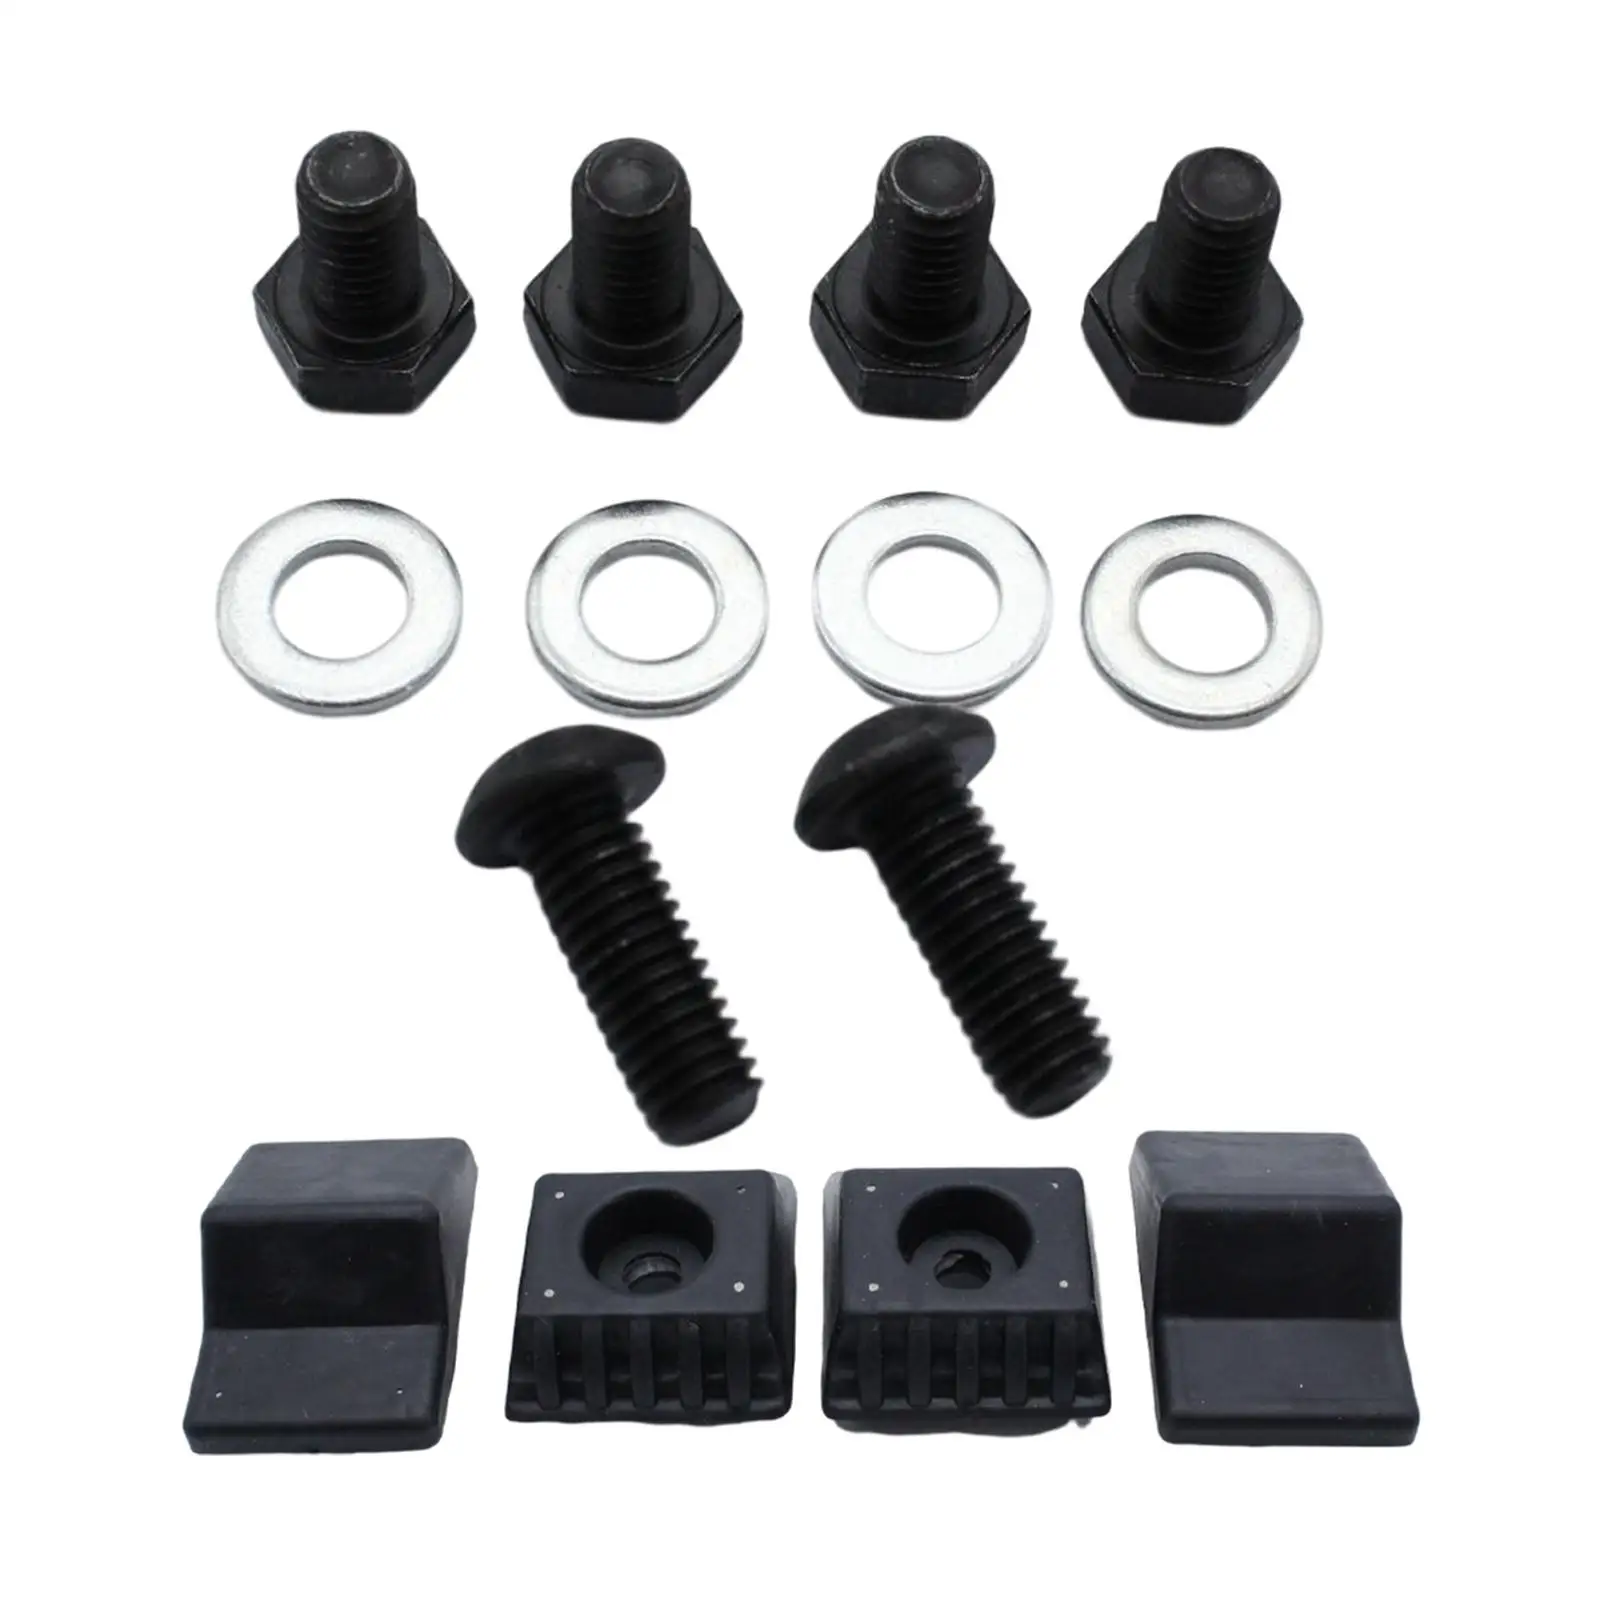 Car Trunk Stop Buffer with Screw Kit Replacement Fit for Mercedes W124 S124